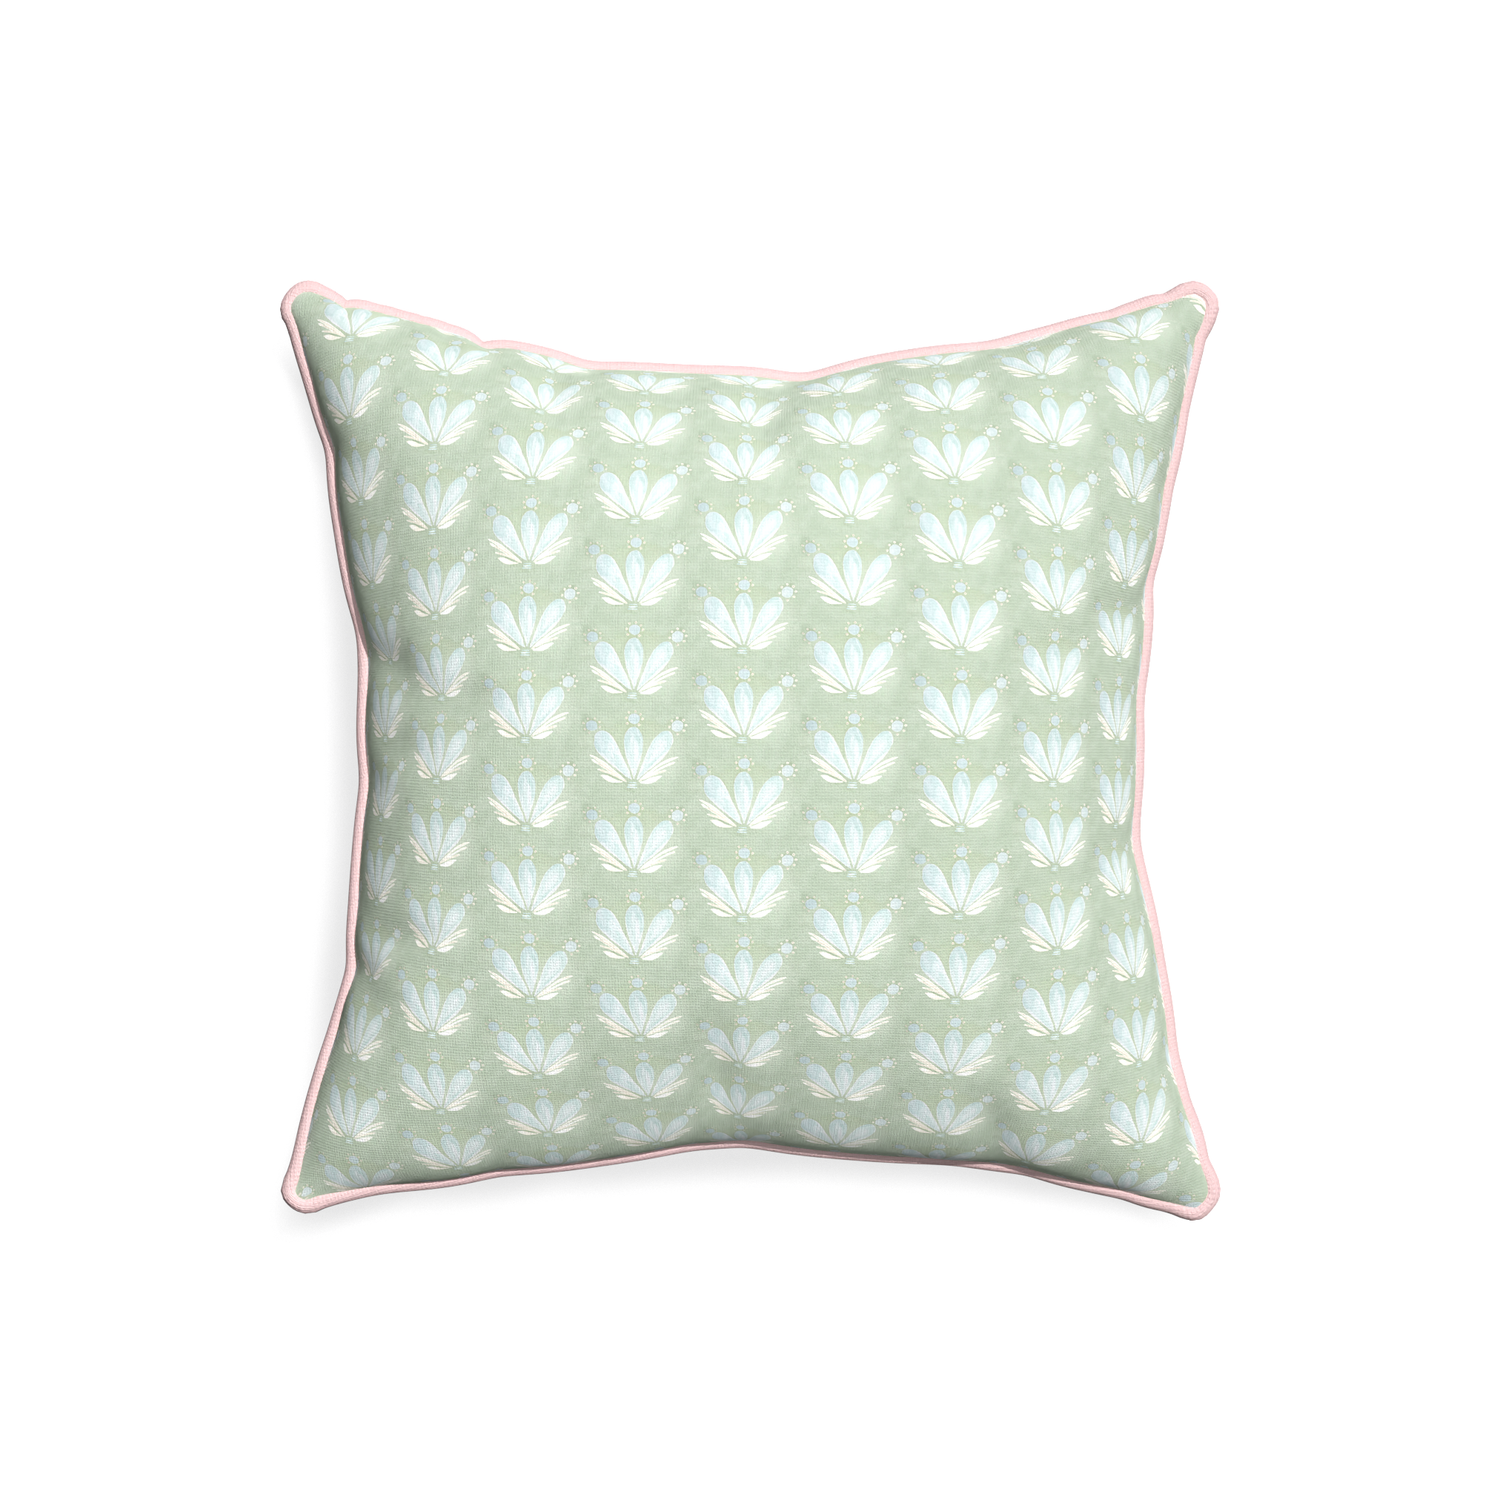 20-square serena sea salt custom blue & green floral drop repeatpillow with petal piping on white background